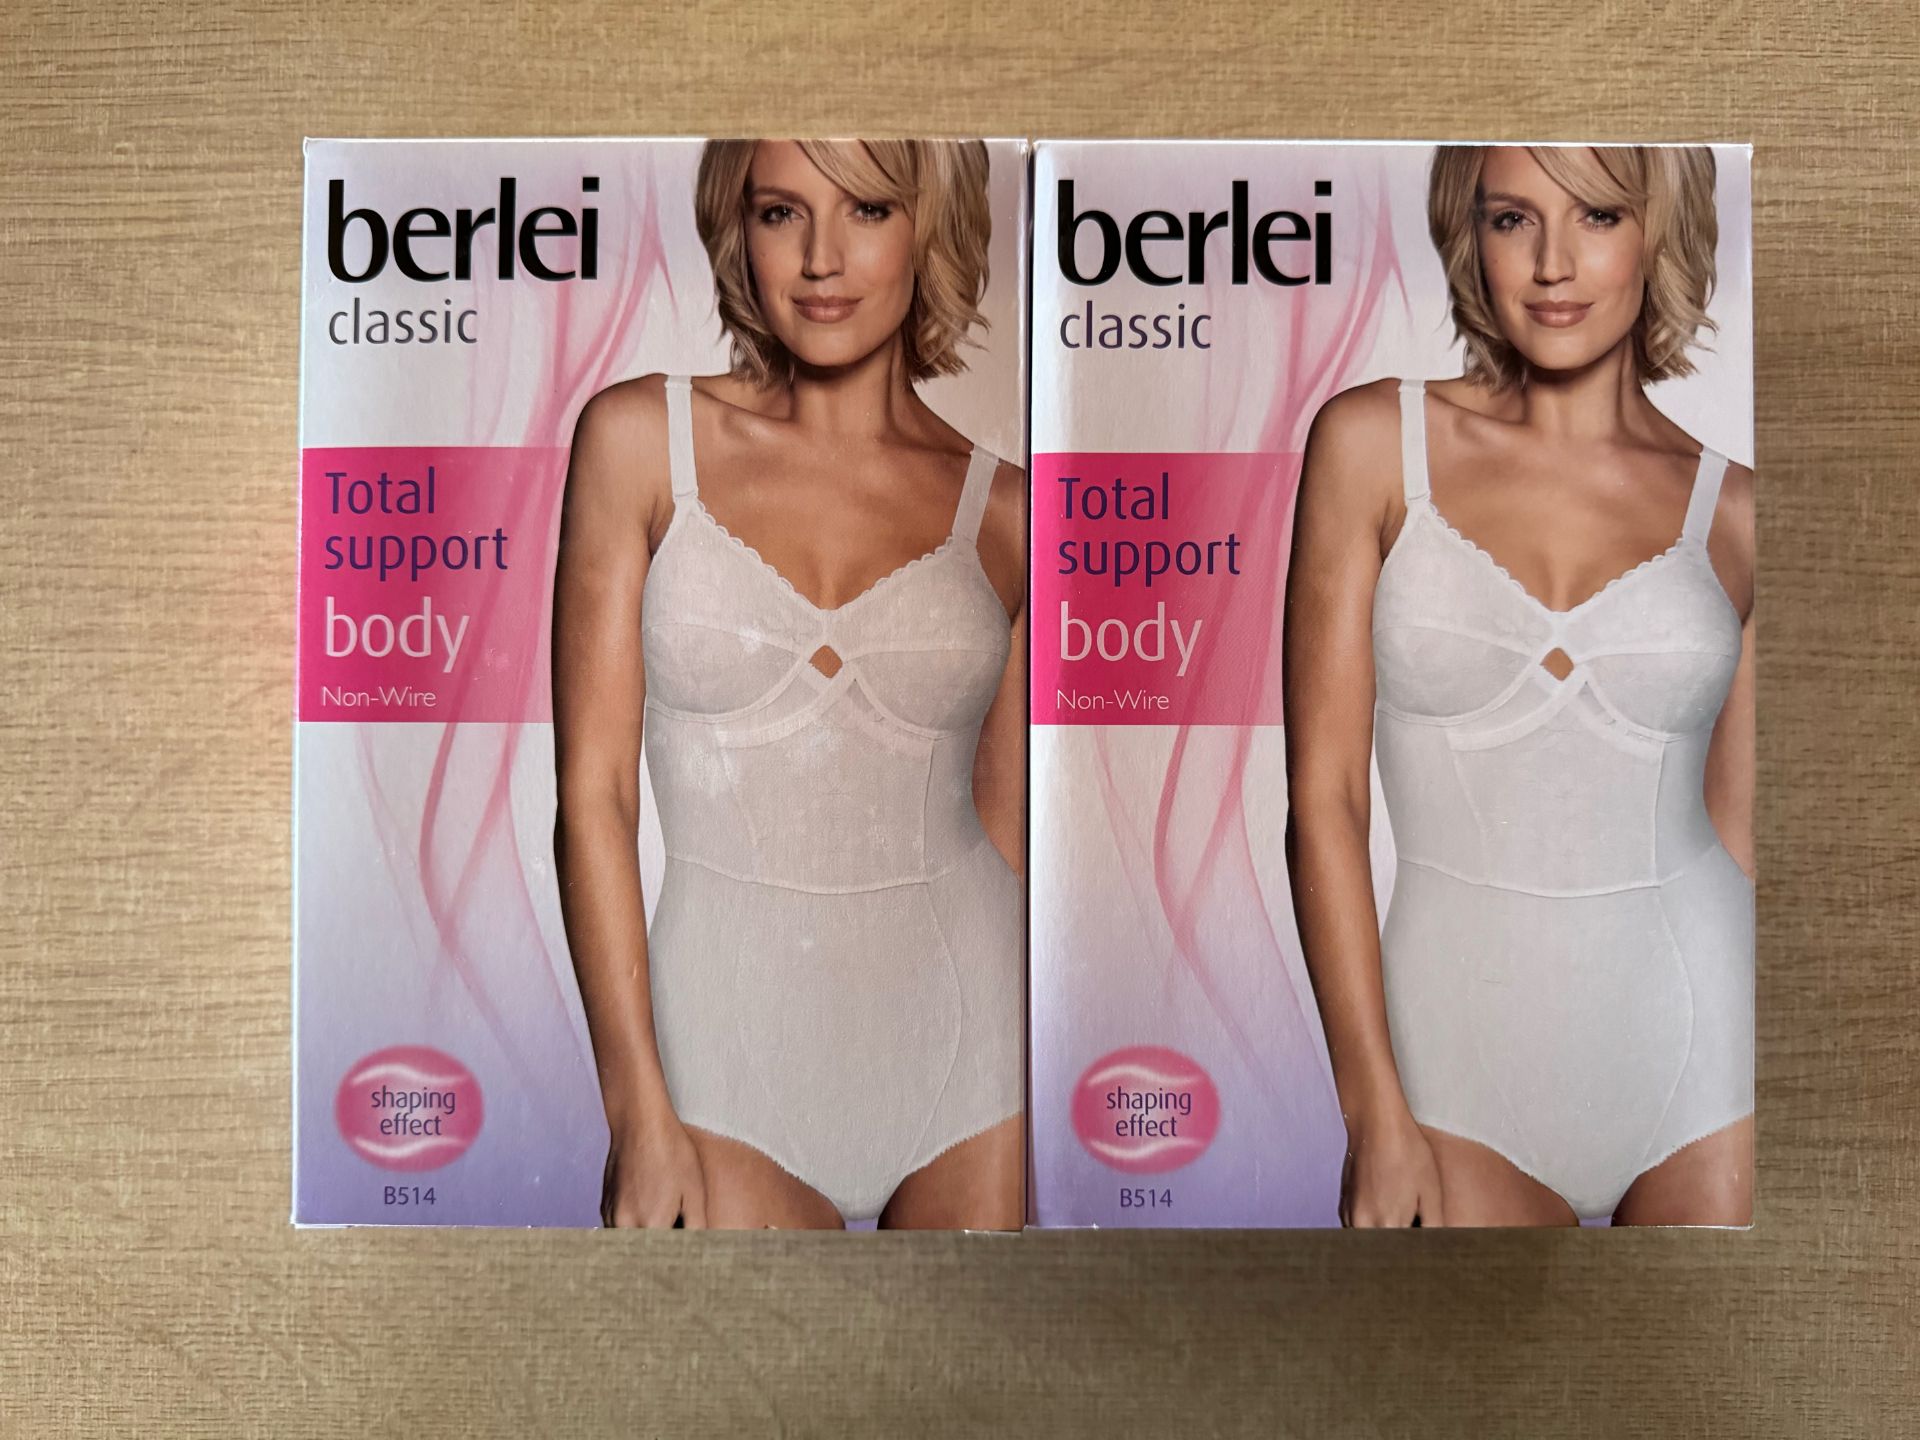 2 x Berlei Classic Total Support Non-Wired Panty Corselette Size 40C Original Box - Image 2 of 2